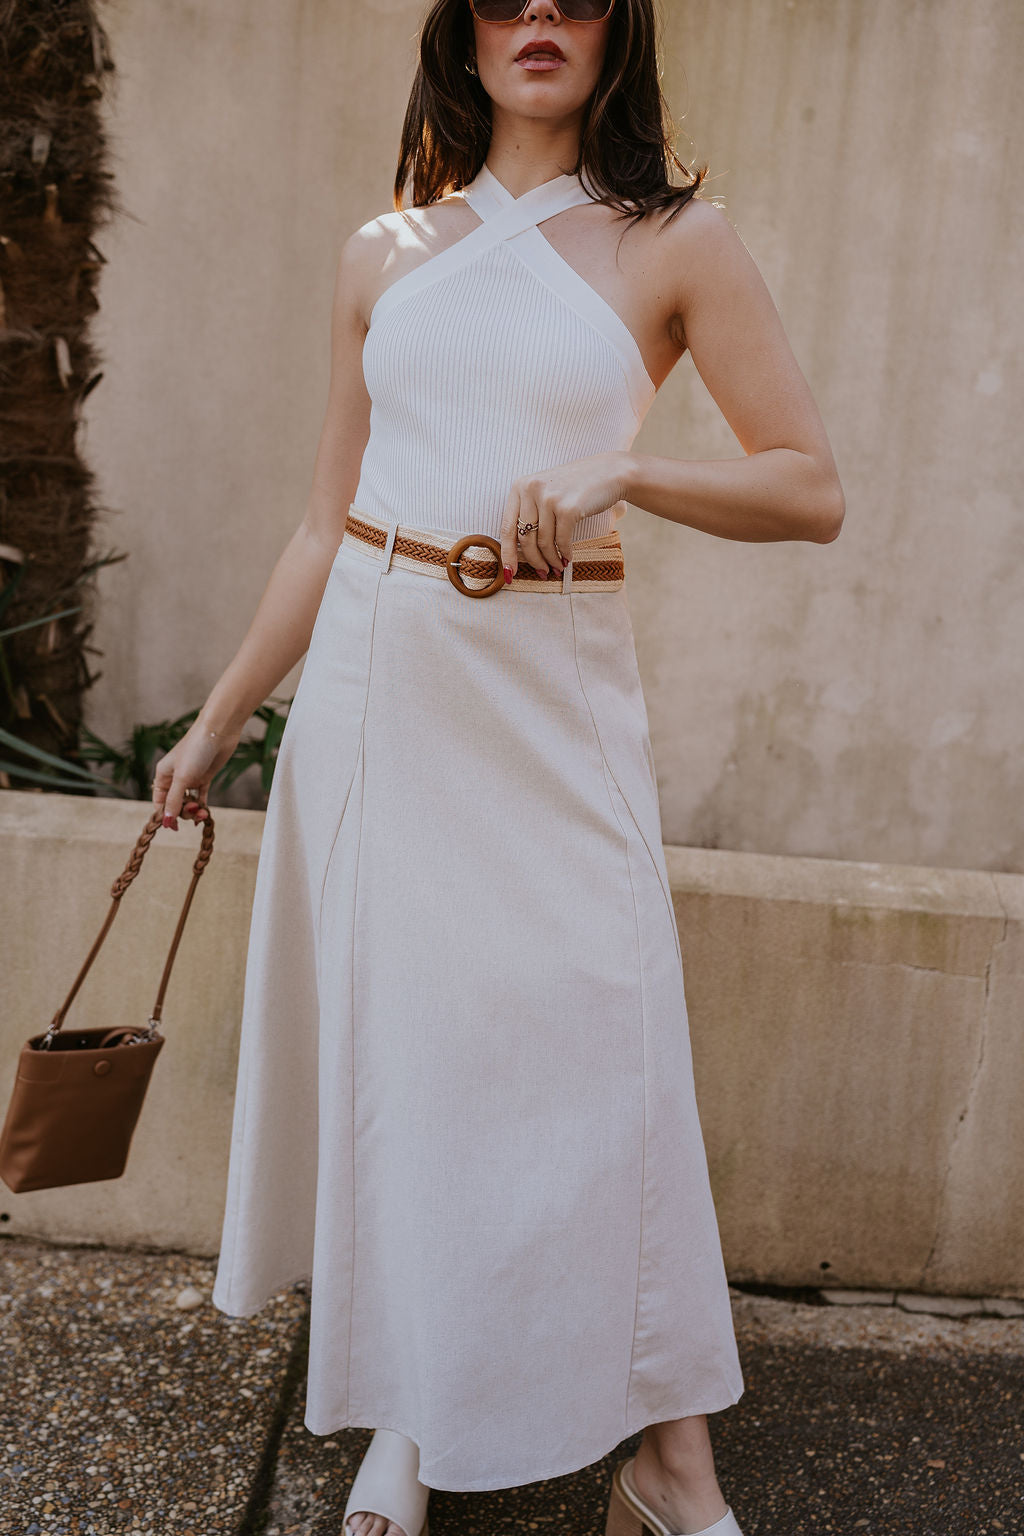 Front view of model wearing the Seychelles Linen Midi Skirt which features natural linen fabric, midi length, flared skirt, natural lining, belt loops, brown and natural crochet adjustable belt and monochrome side zipper with hook closure.